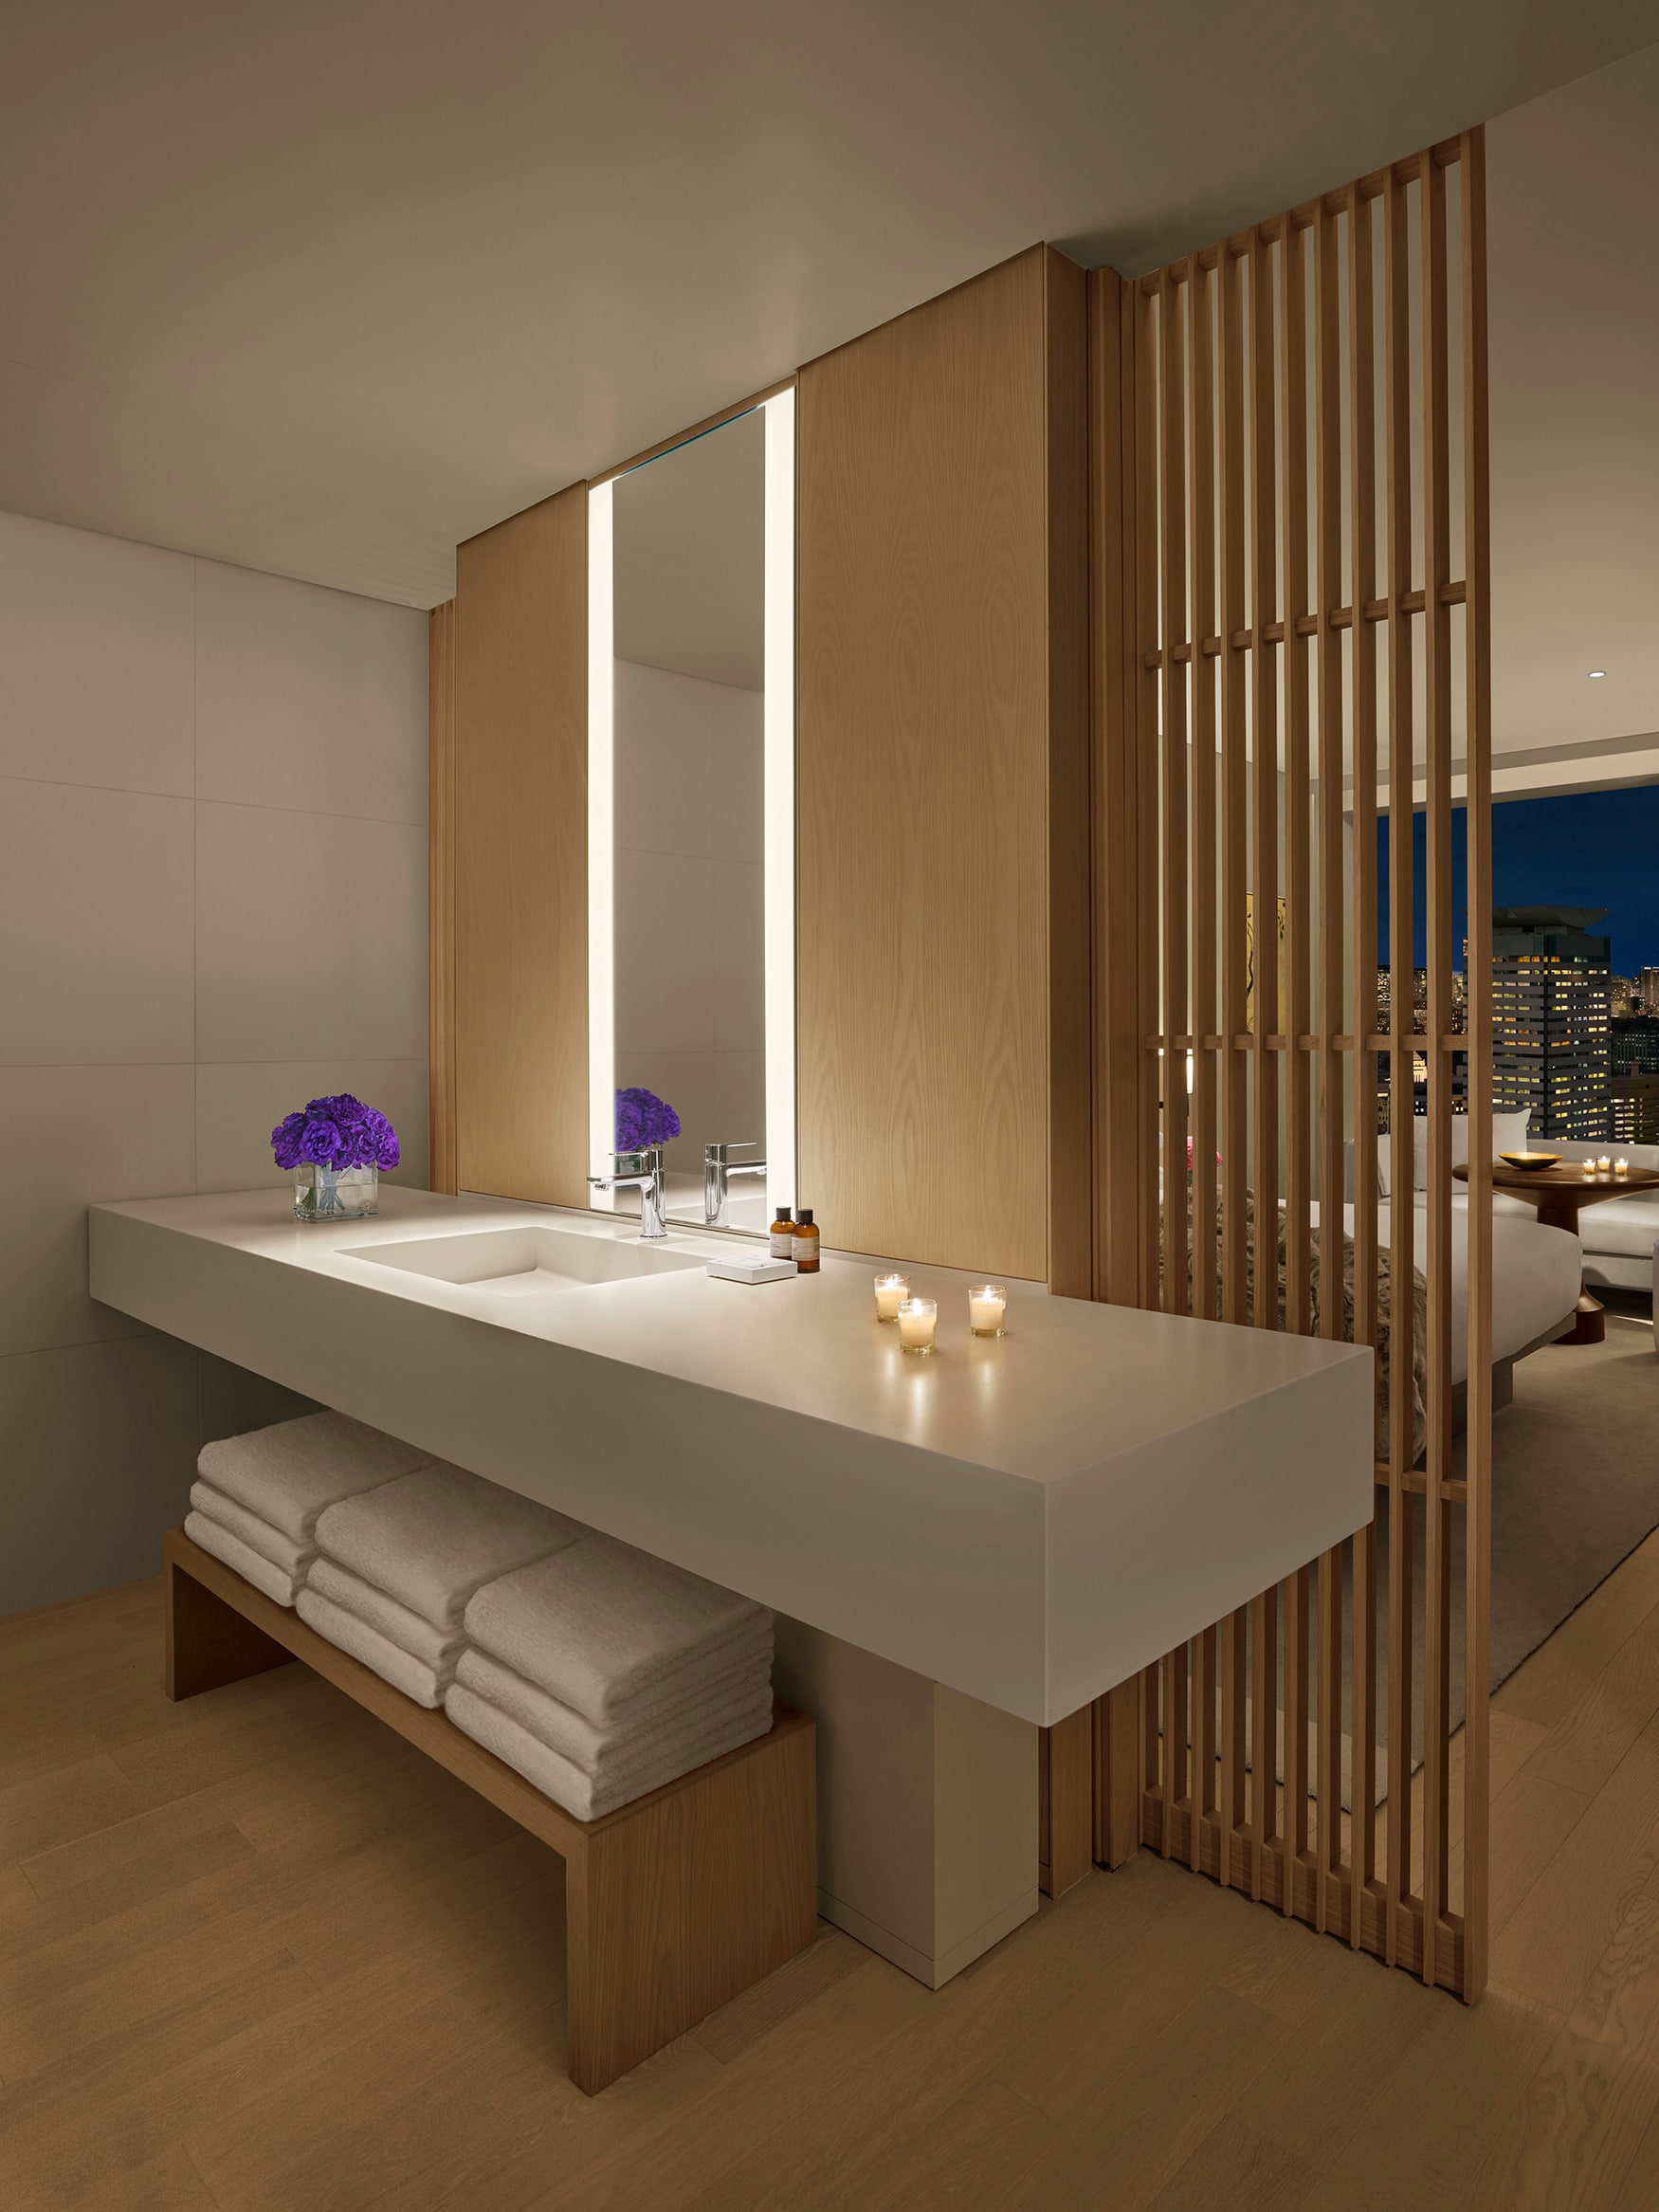 A washroom with a sense of unity with the interior and living room